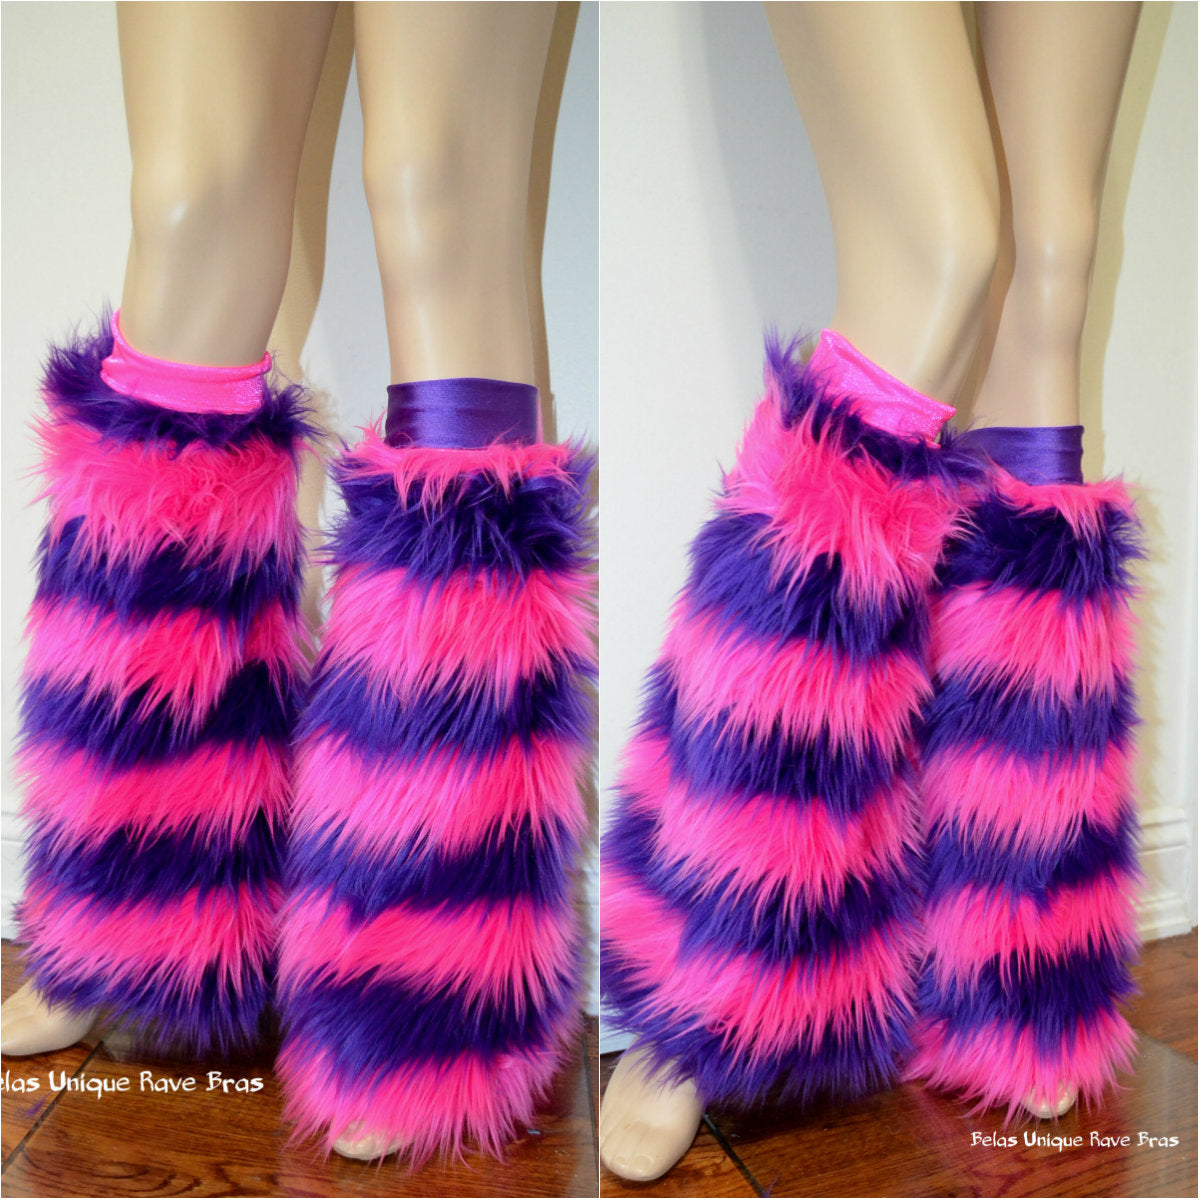 Alice In Wonderland Cheshire Cat Fur Leg Warmers Rave Fluffies